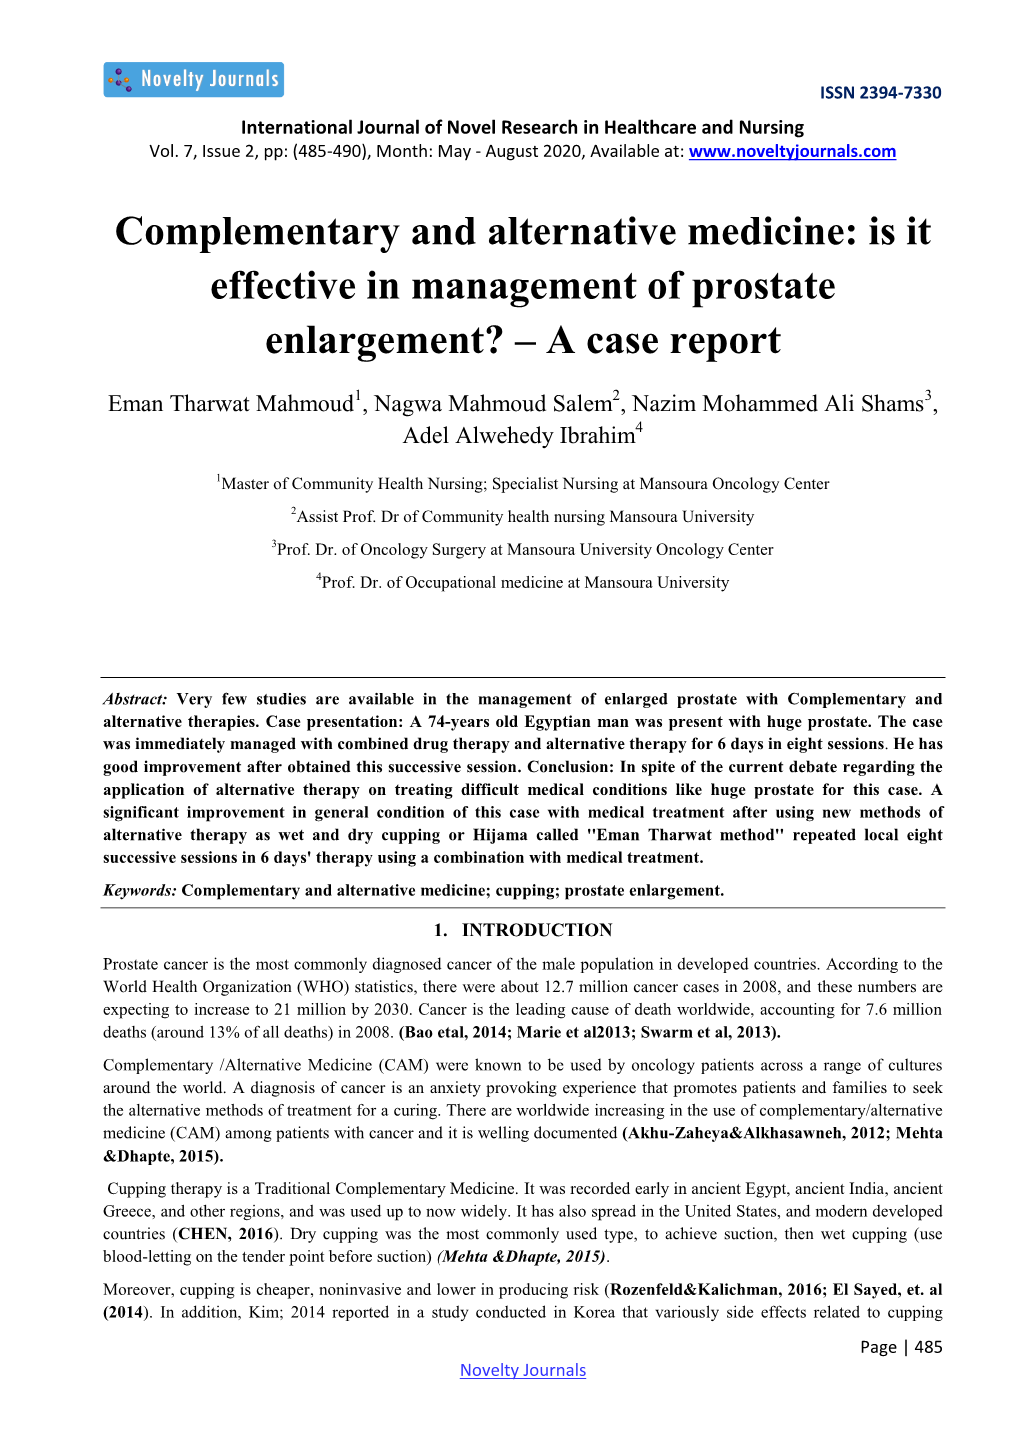 Complementary and Alternative Medicine: Is It Effective in Management of Prostate Enlargement? – a Case Report